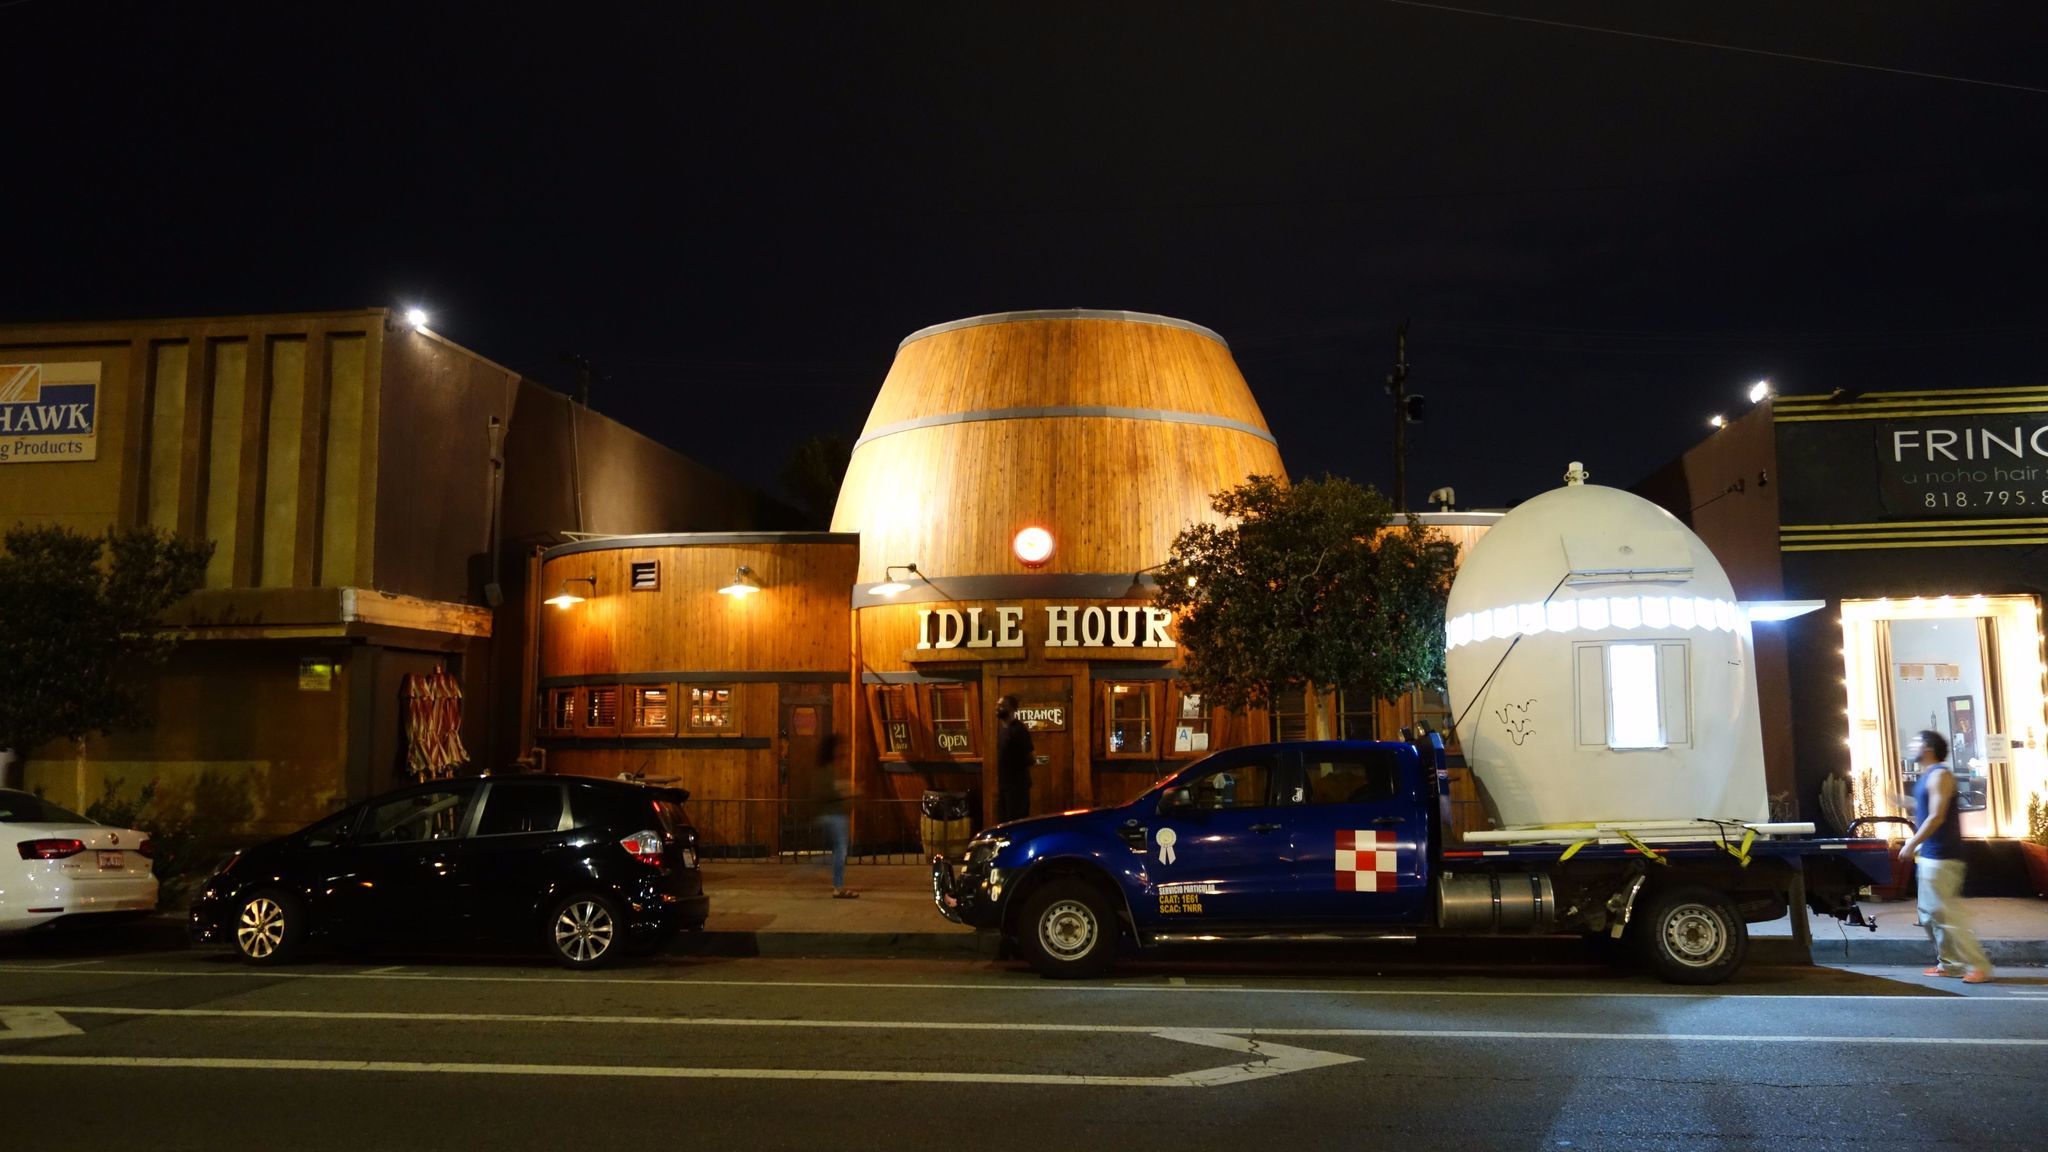 The NuMu parked outside the Idle Hour bar in North Hollywood, which is shaped like a barrel.